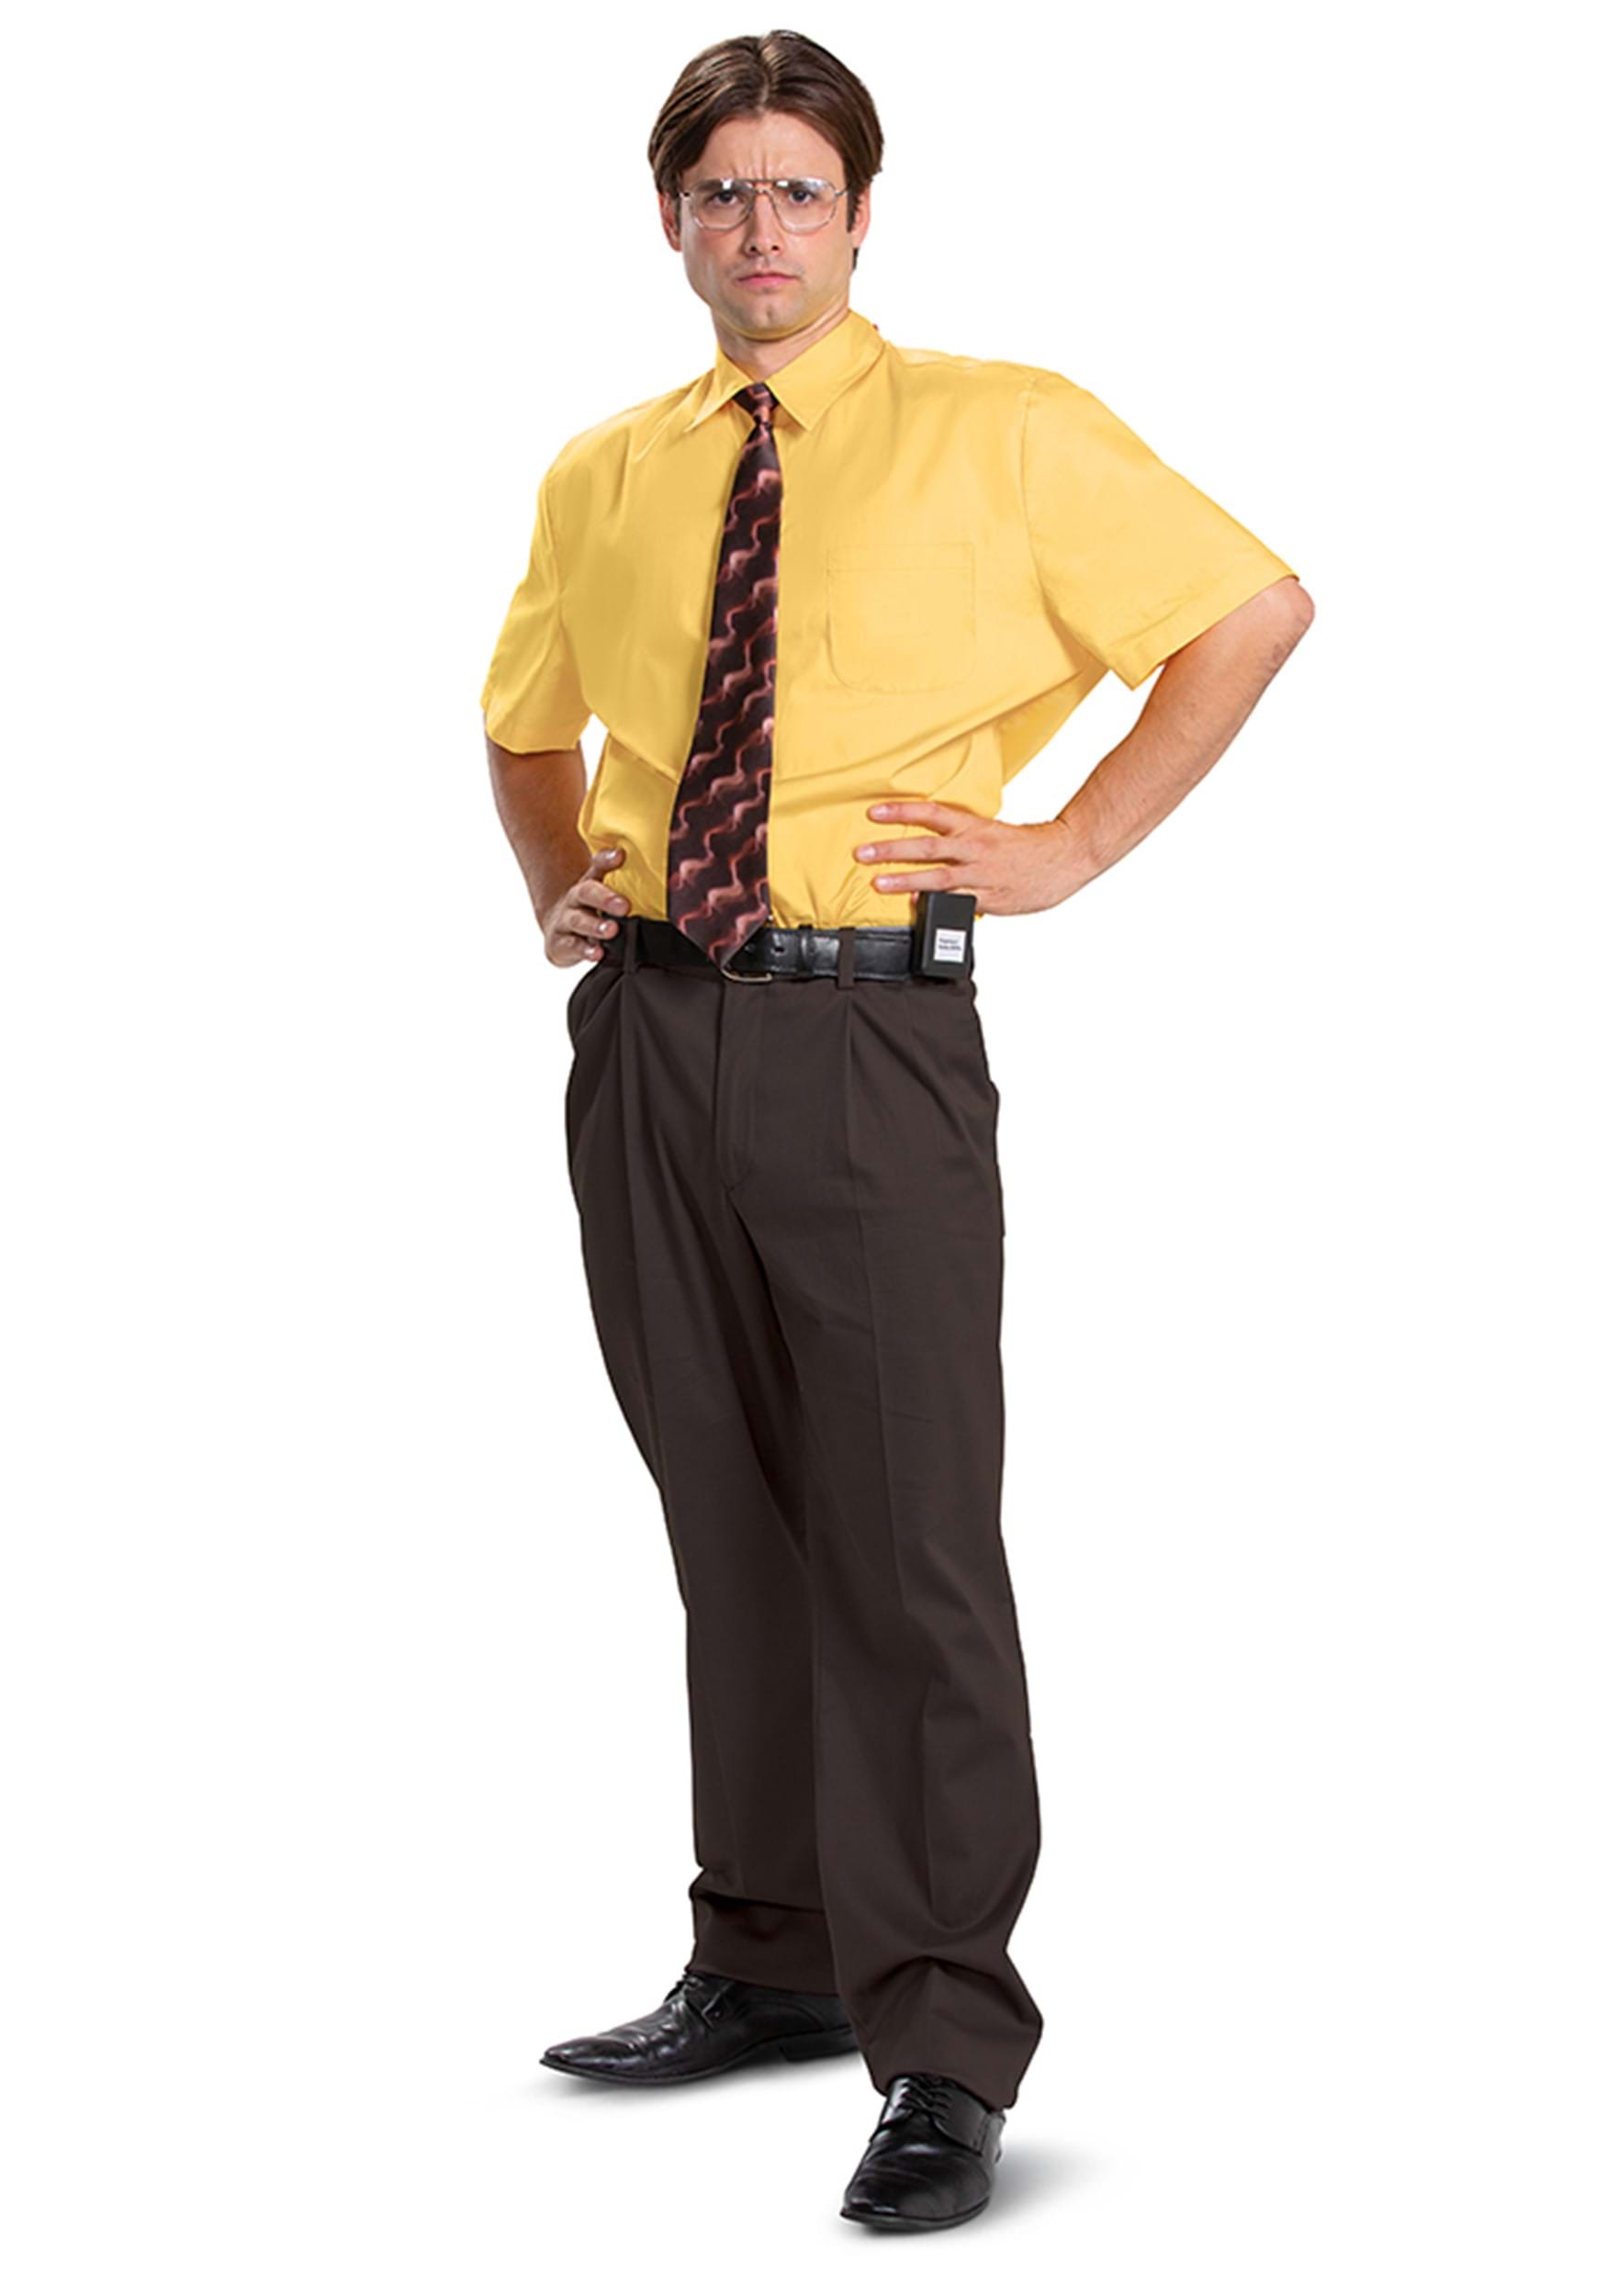 Photos - Fancy Dress Disguise Adult The Office Dwight Costume Yellow/Brown